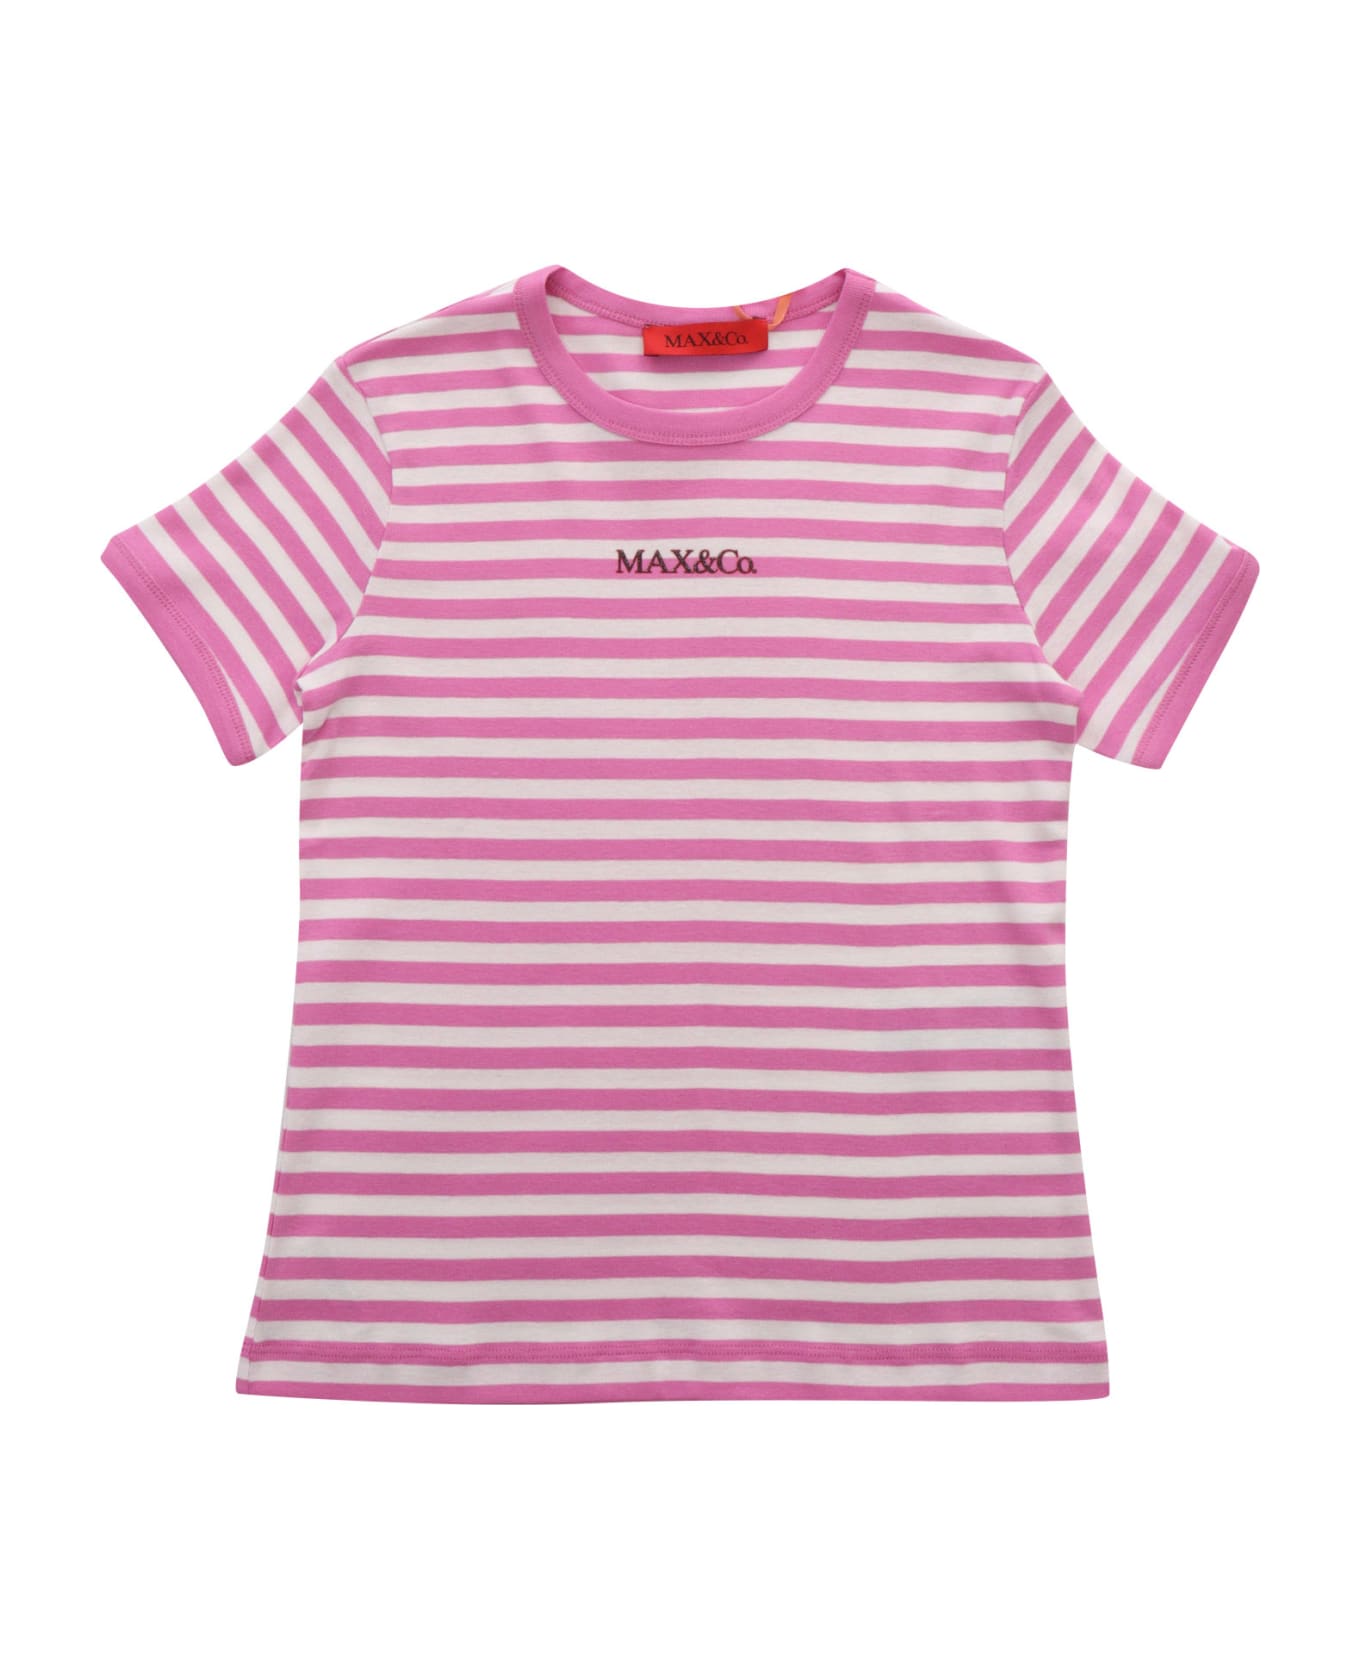 Max&Co. Pink Striped T-shirt - PINK Tシャツ＆ポロシャツ